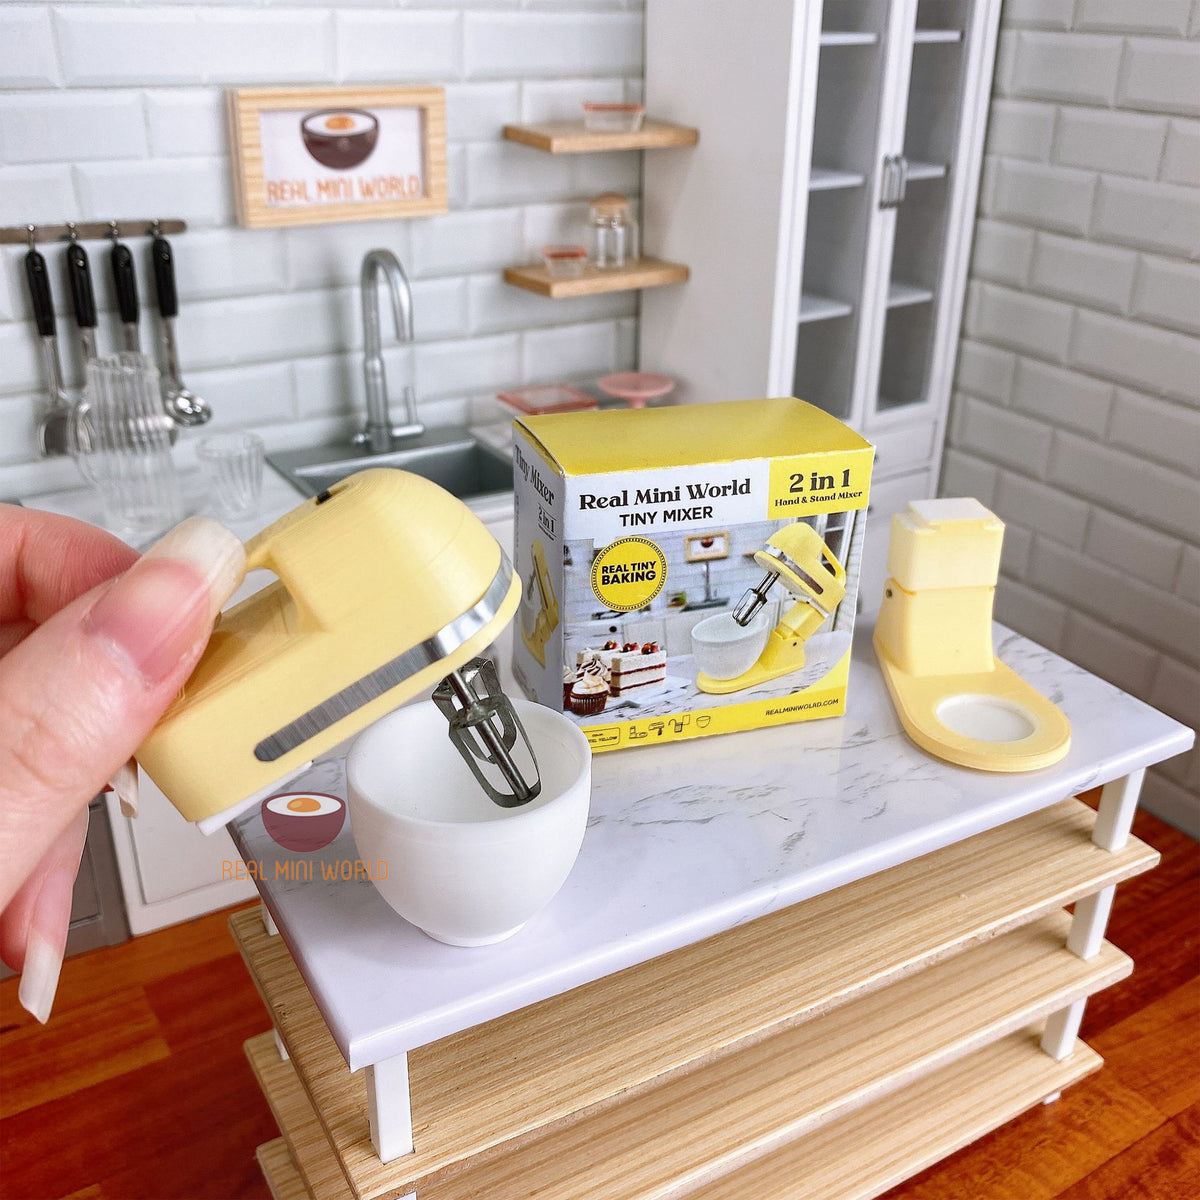 Miniature REAL Working Mixer 2in1 Hand and Stand Mixer in Pastel : Miniature  Real Cooking & Baking at Tiny Kitchen 